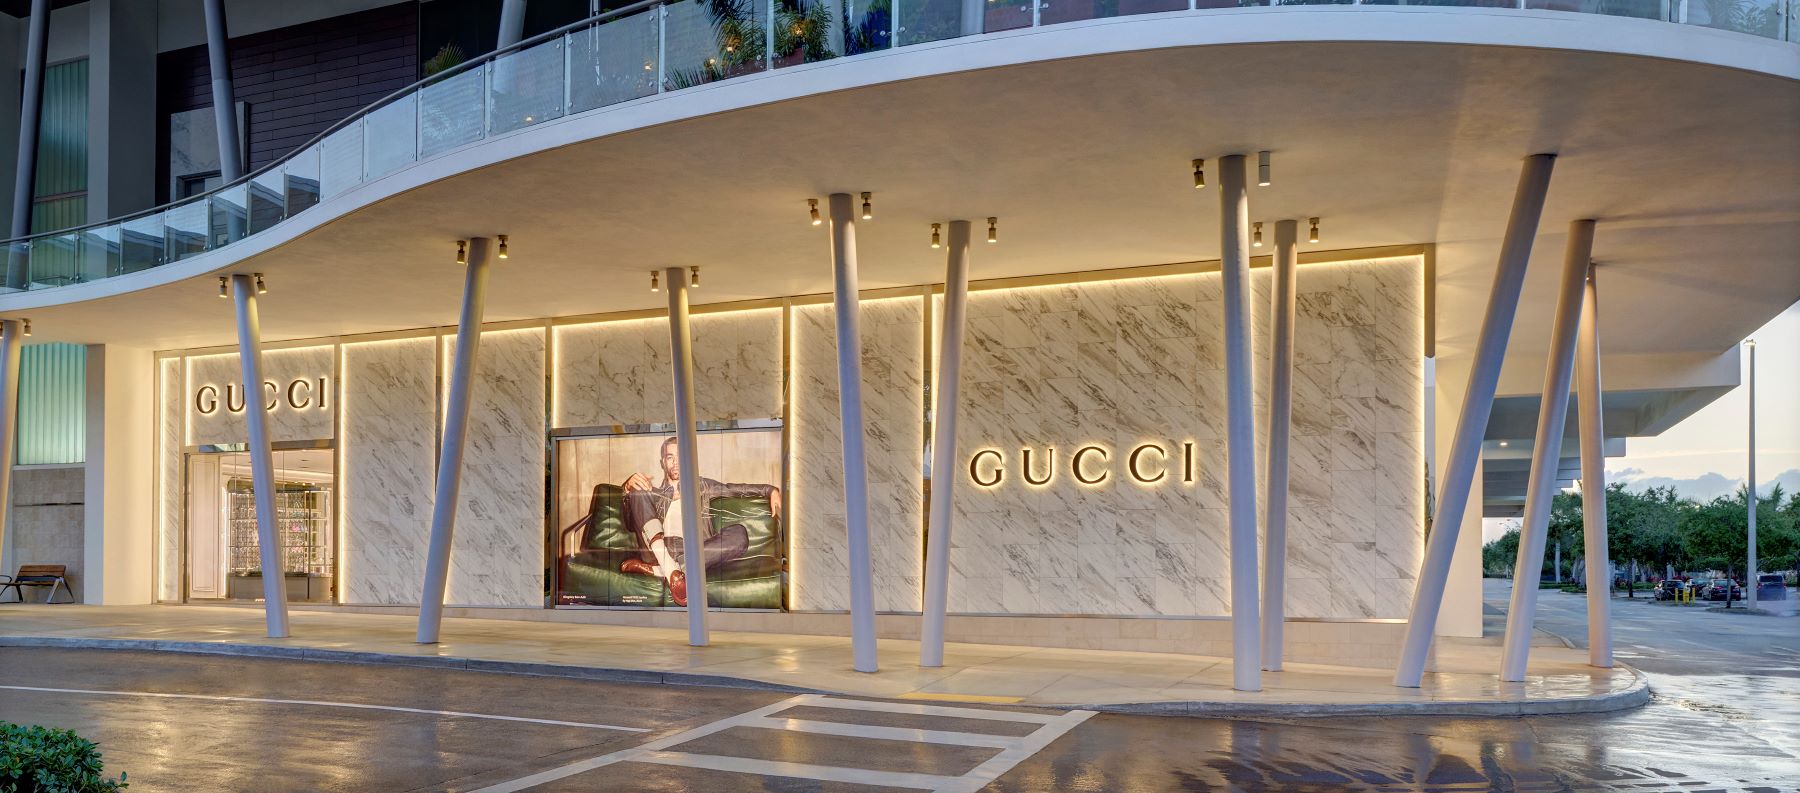 The New Gucci Boutique at Dadeland Mall